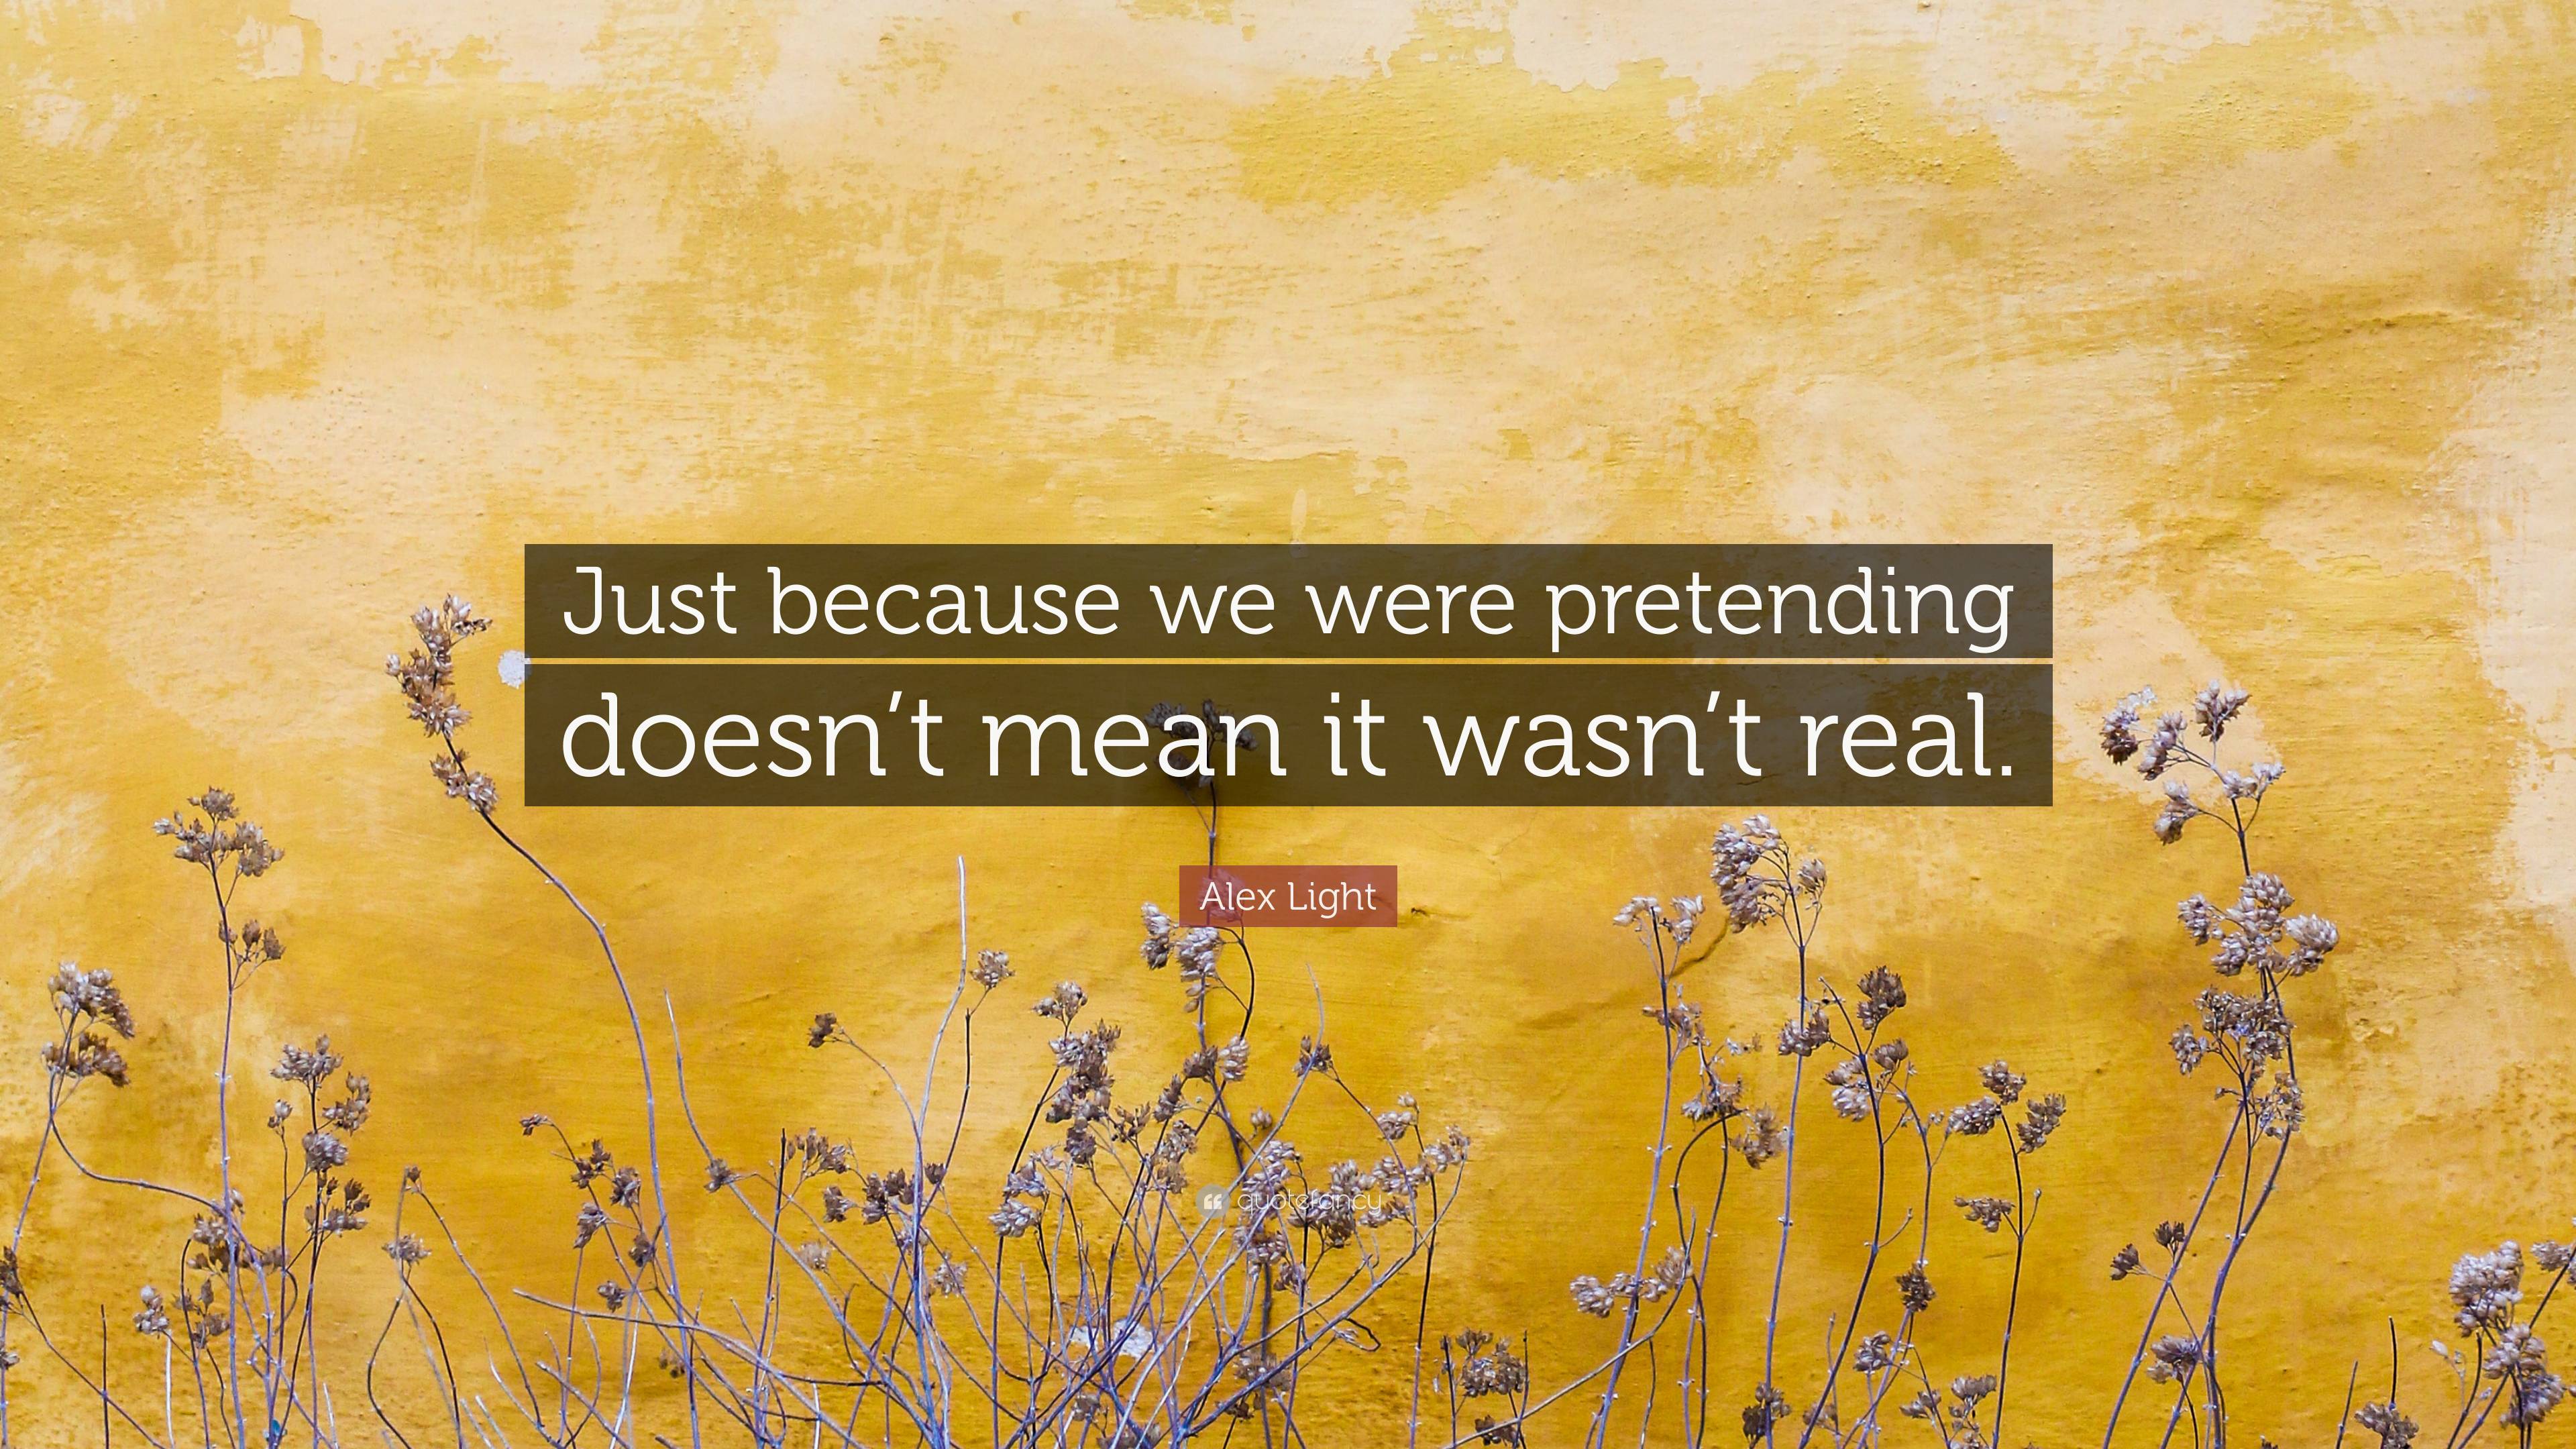 Alex Light Quote: “Just because we were pretending doesn't mean it